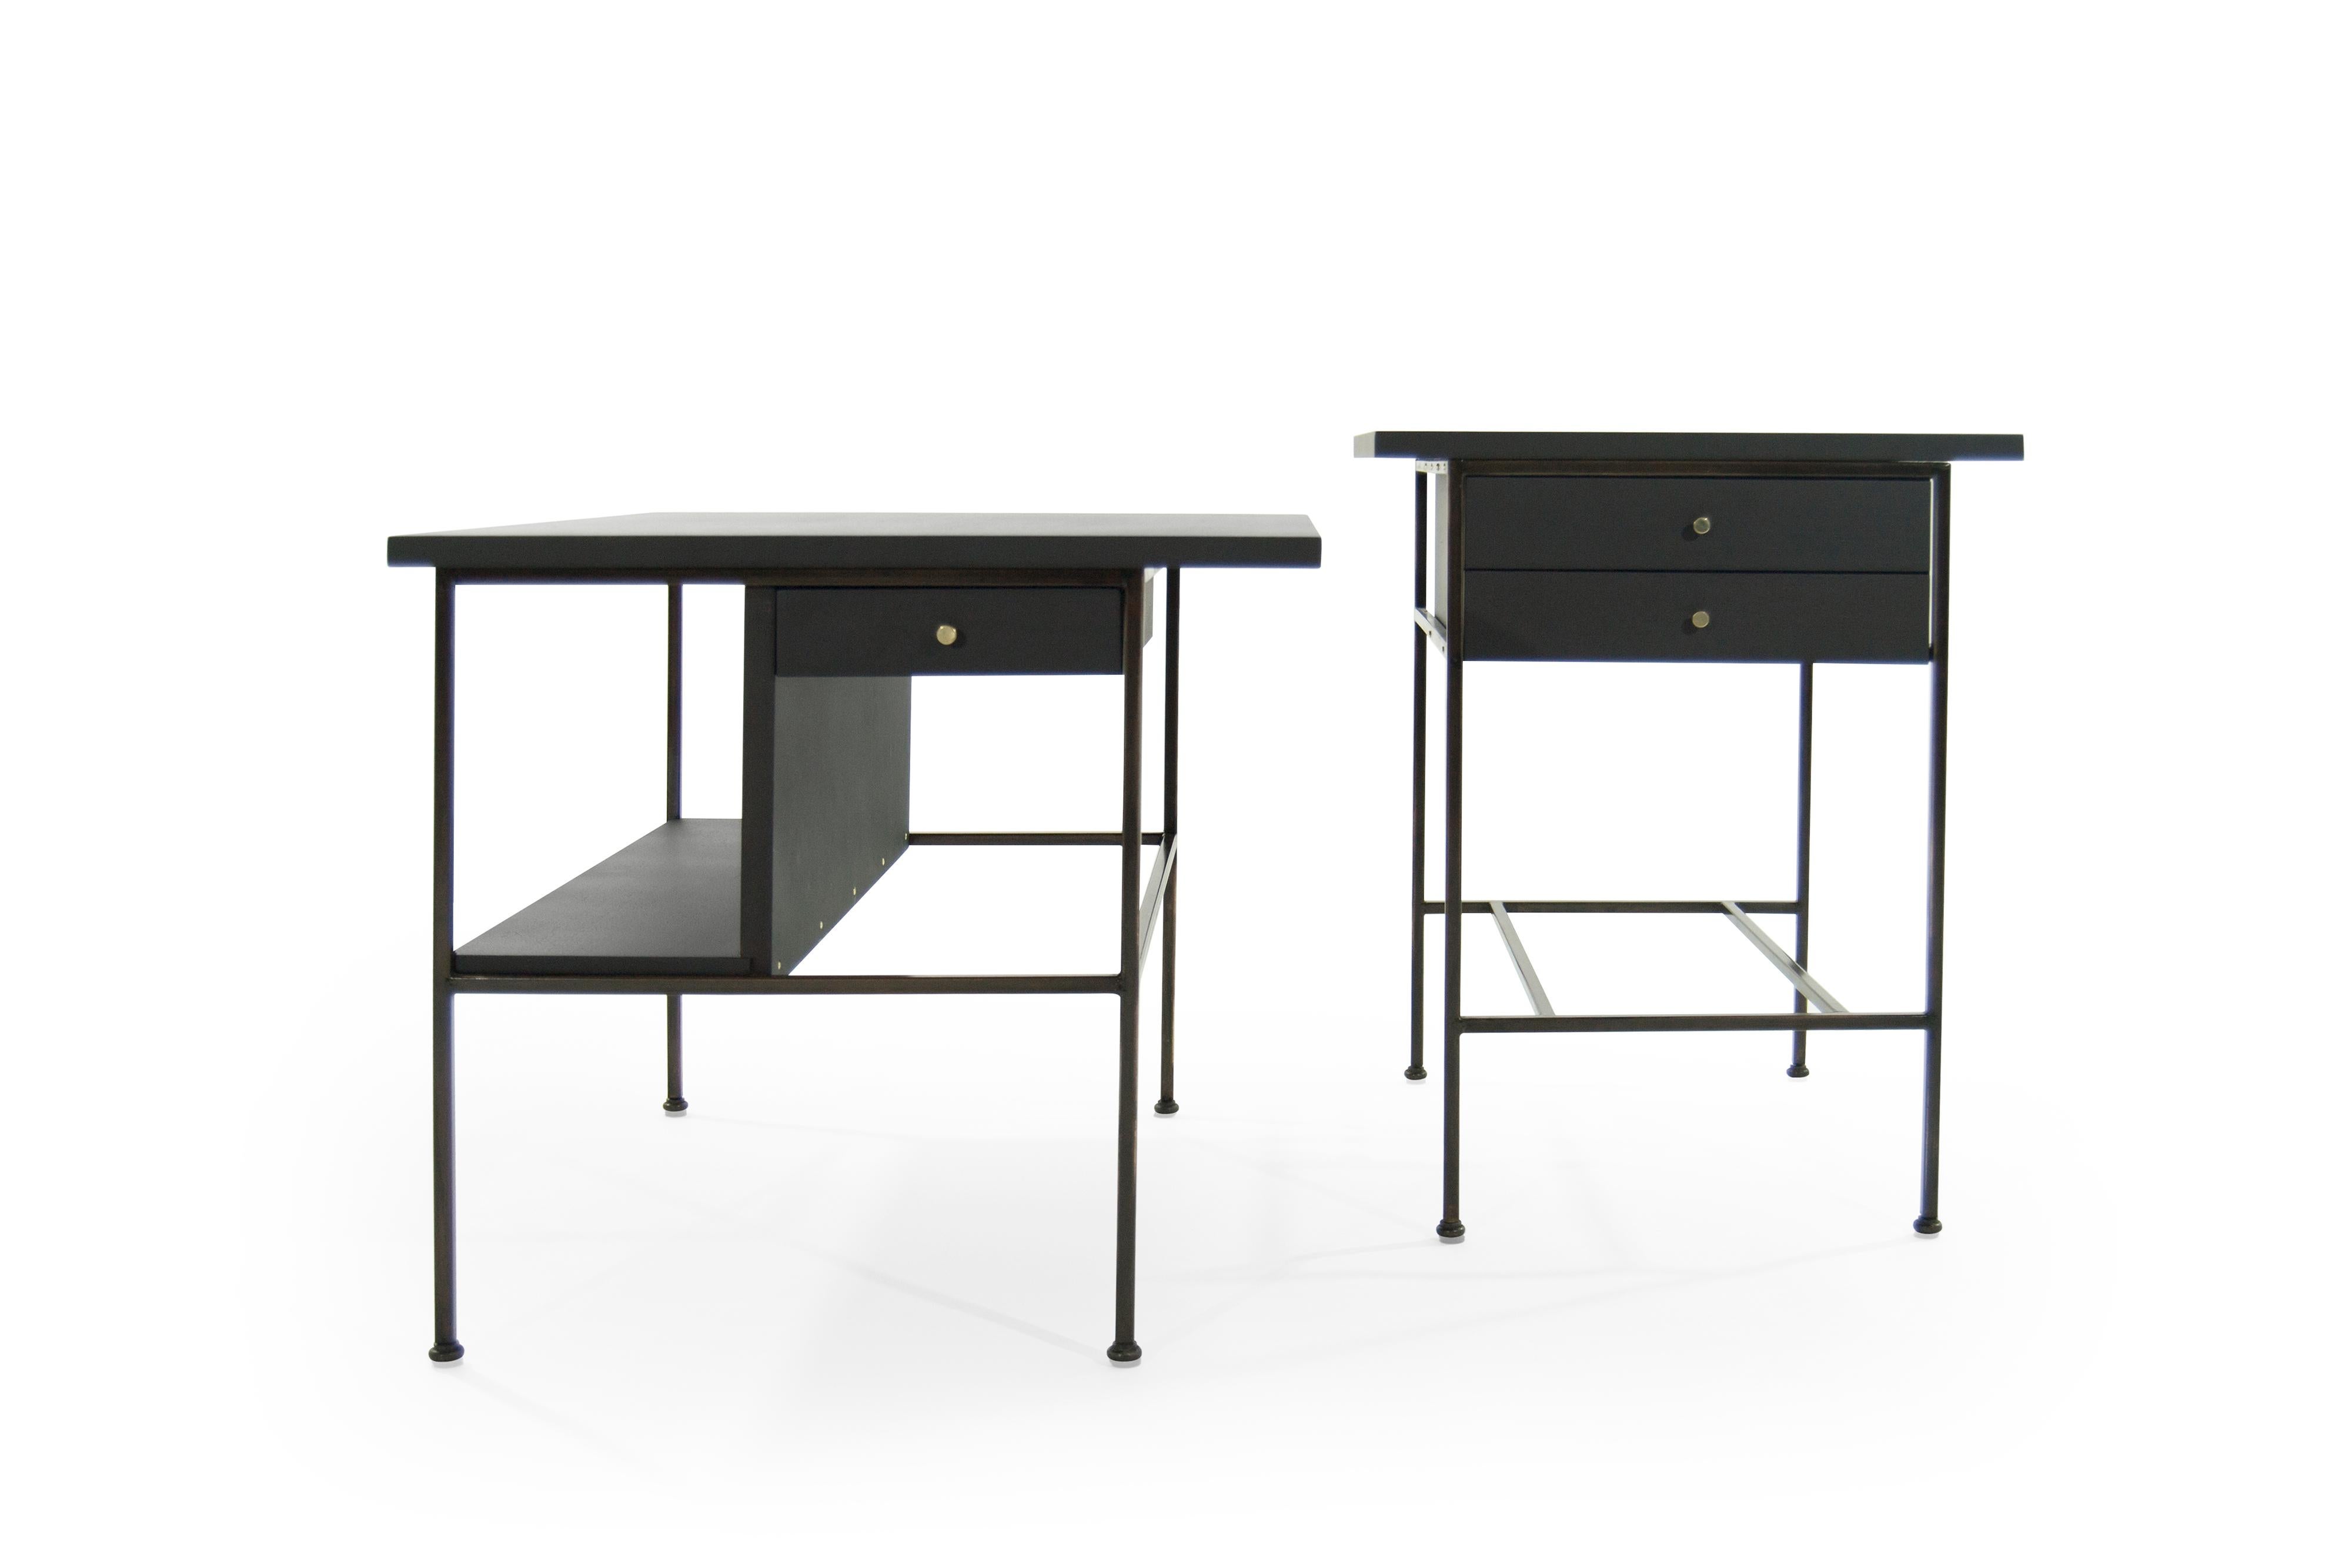 An important set of fully restored bronze side tables designed by Paul McCobb, circa 1950s.

Bronze frames have been fully restored and sit in mint condition, hand-polished brass hardware. Mahogany tops and drawers have been ebonized, topped in an